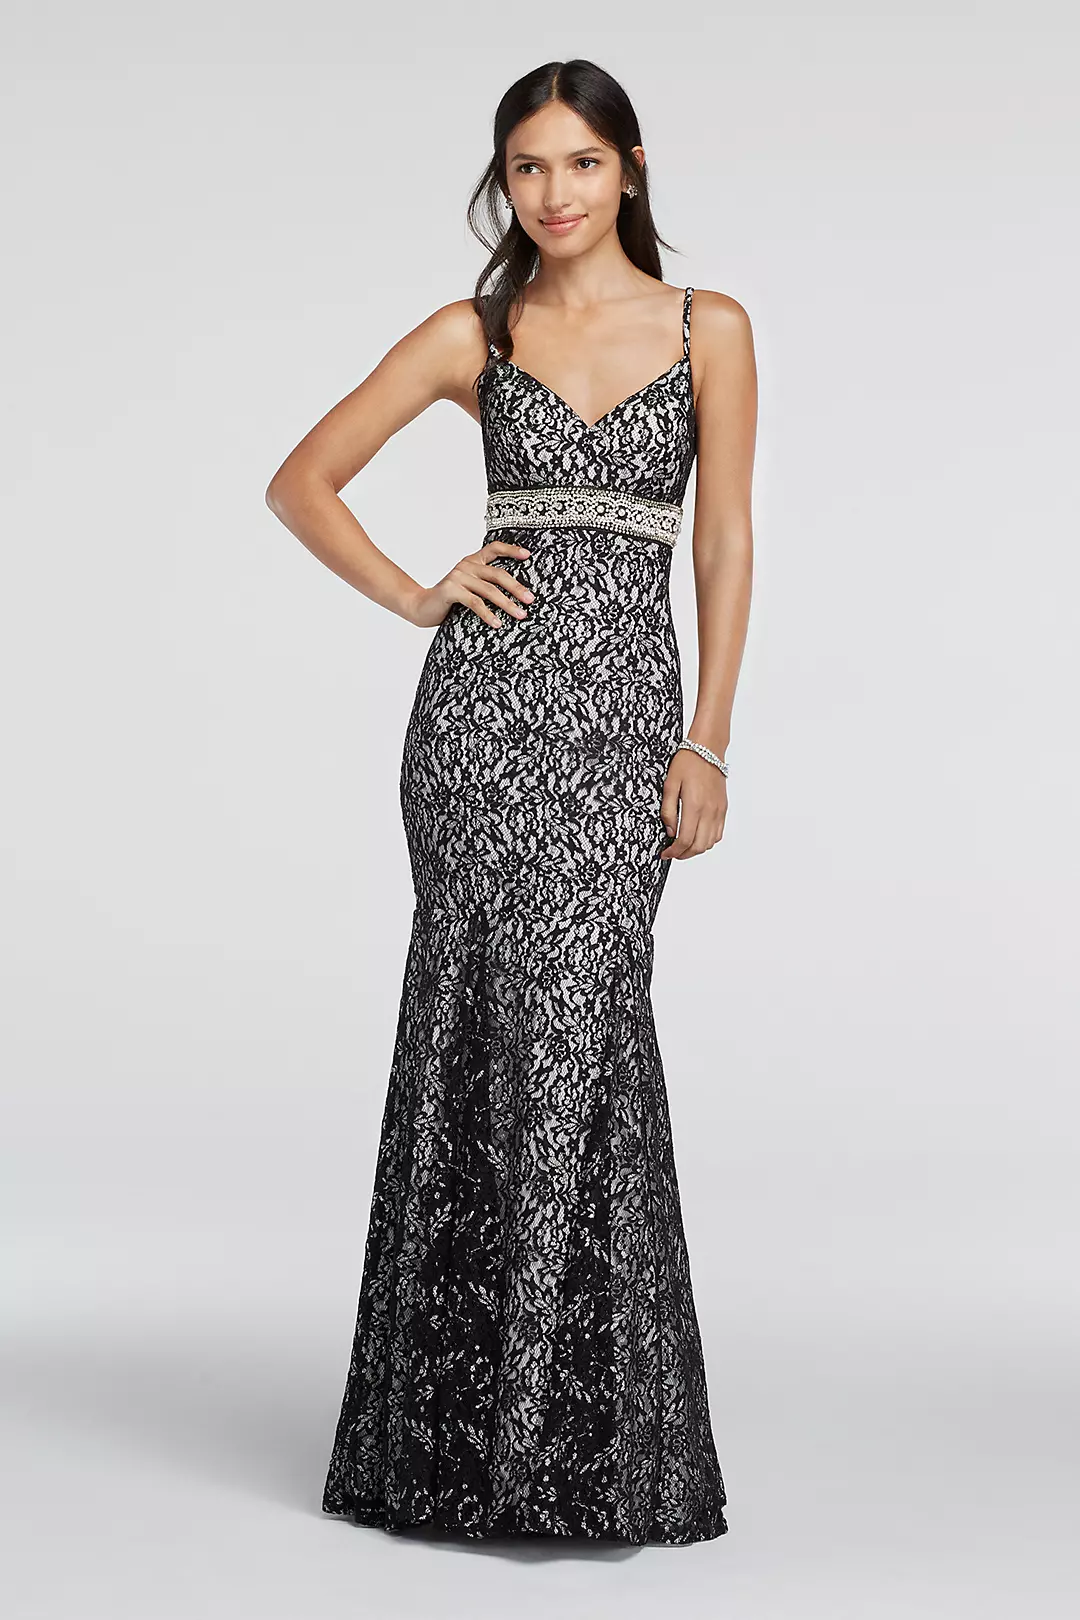 Spaghetti Strap Lace Prom Dress with Beaded Waist Image